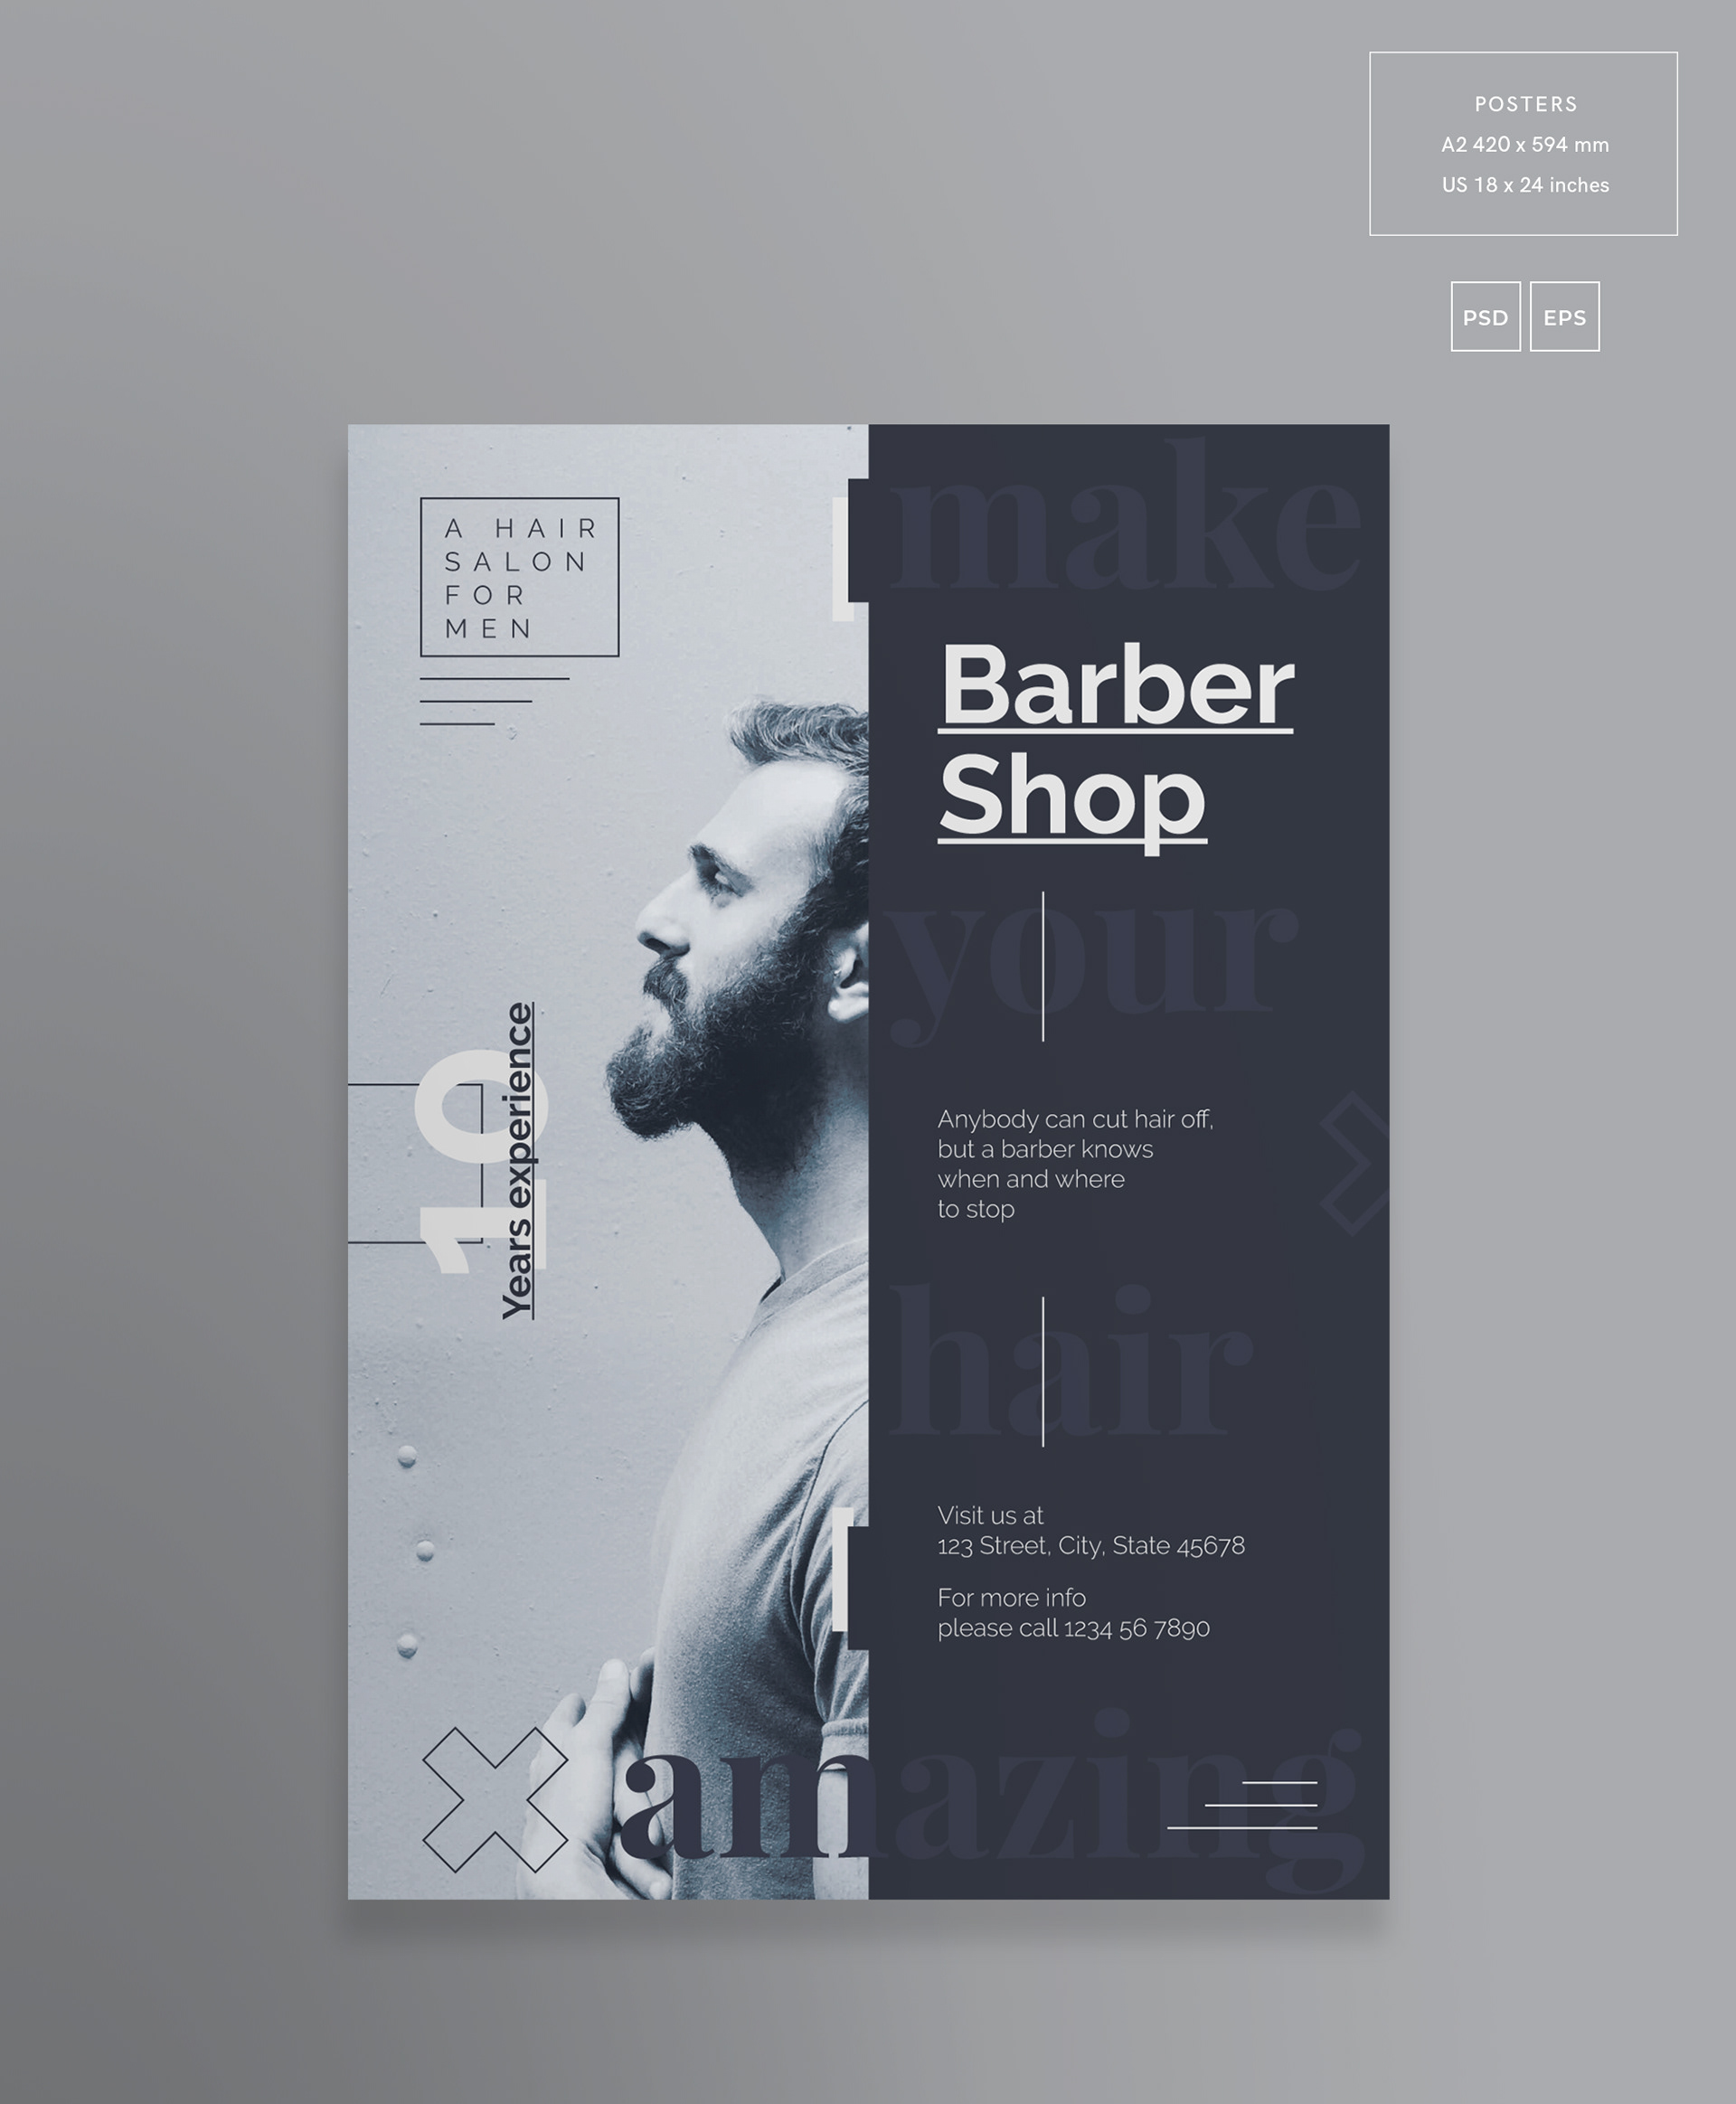 Barbershop Salon Template Collection on Behance